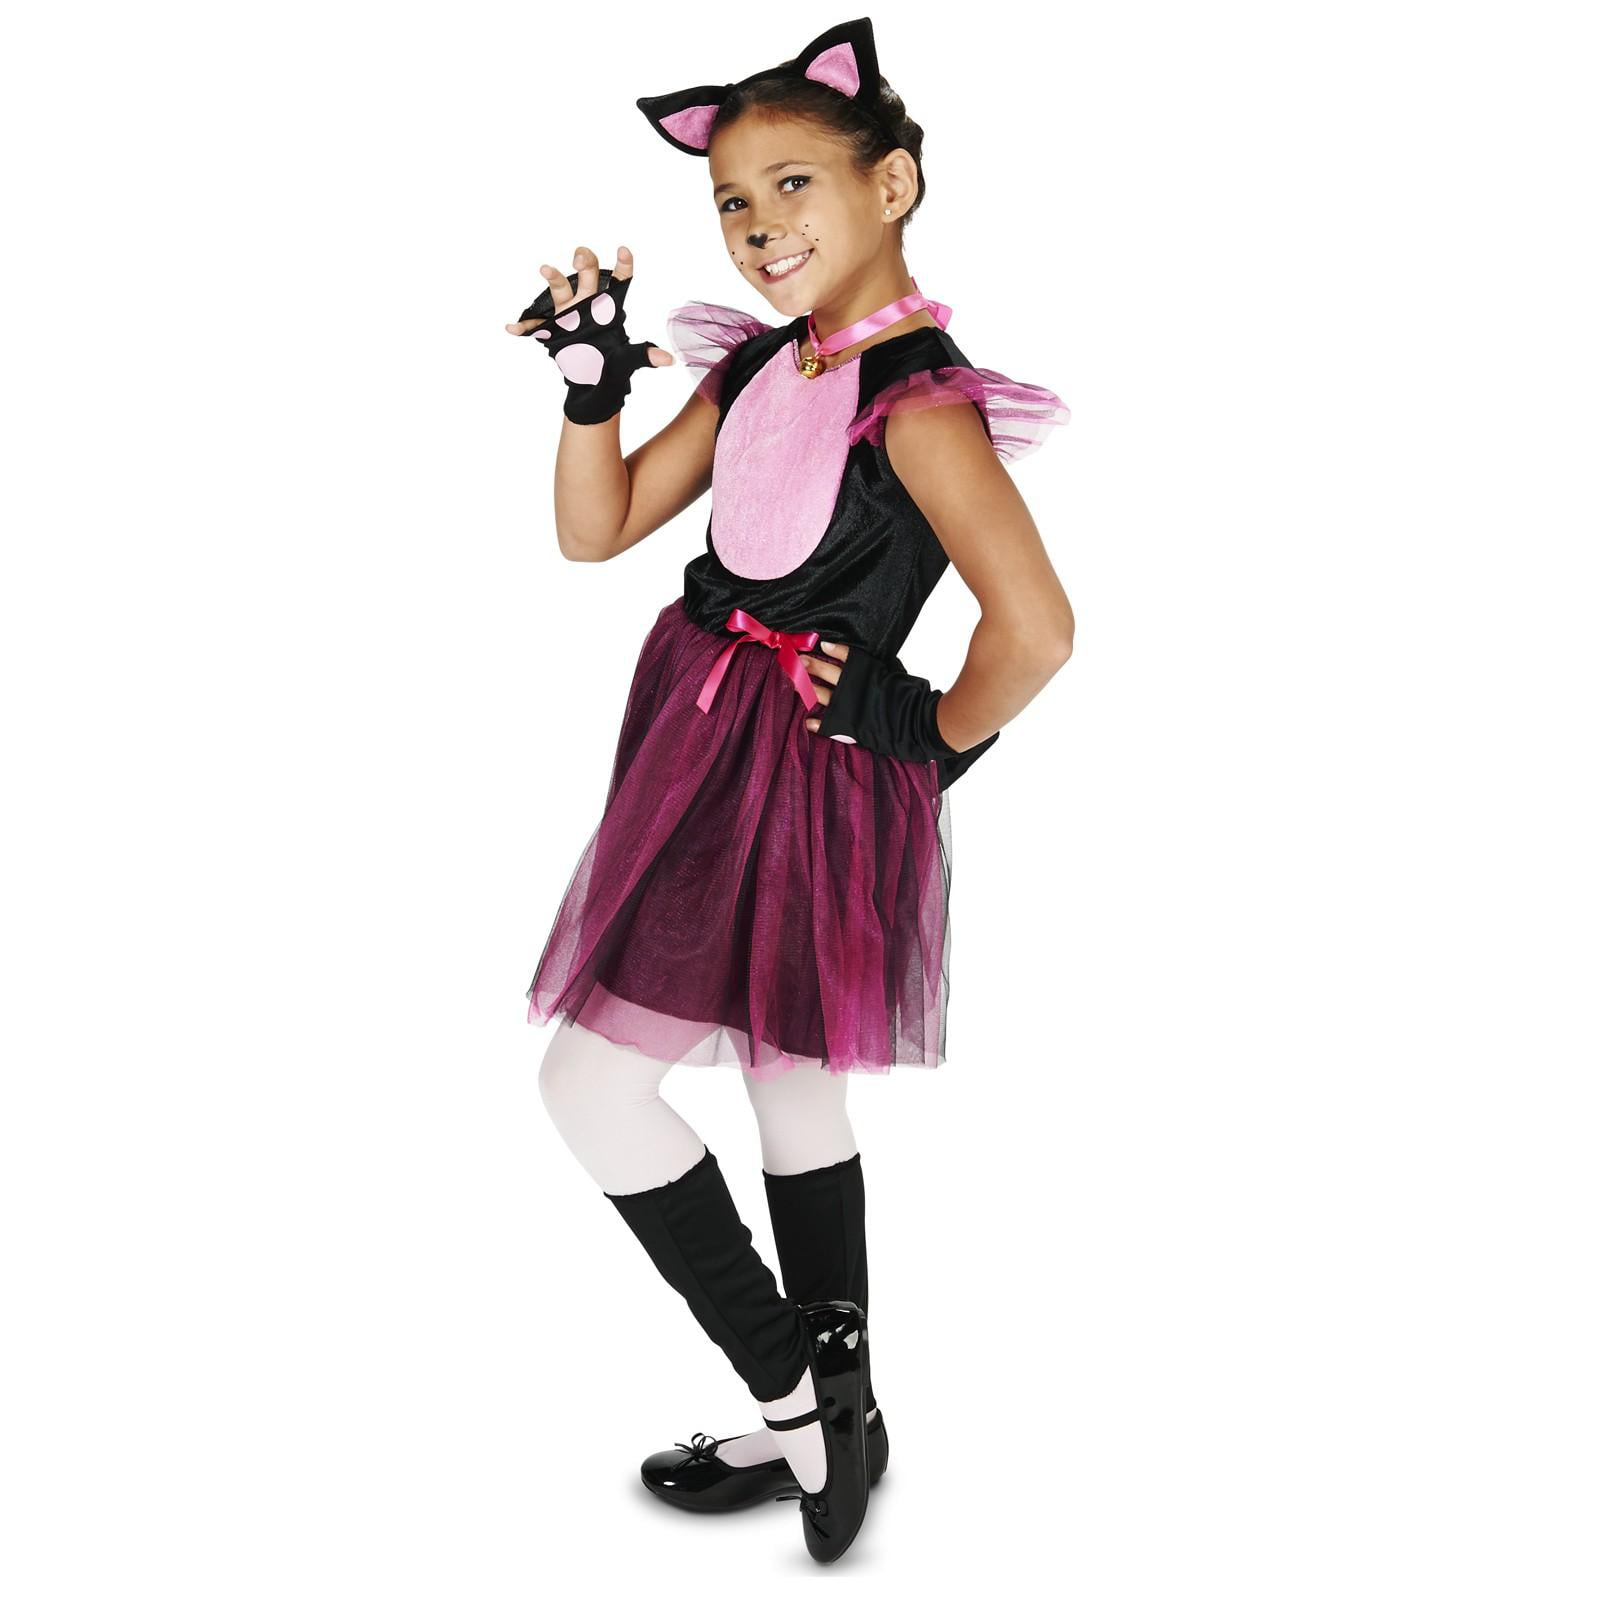 Leadtex Little Girl's Cute Cat Dress Costumes With One Ear Headband and One Tail for Parties,Three sizes. 